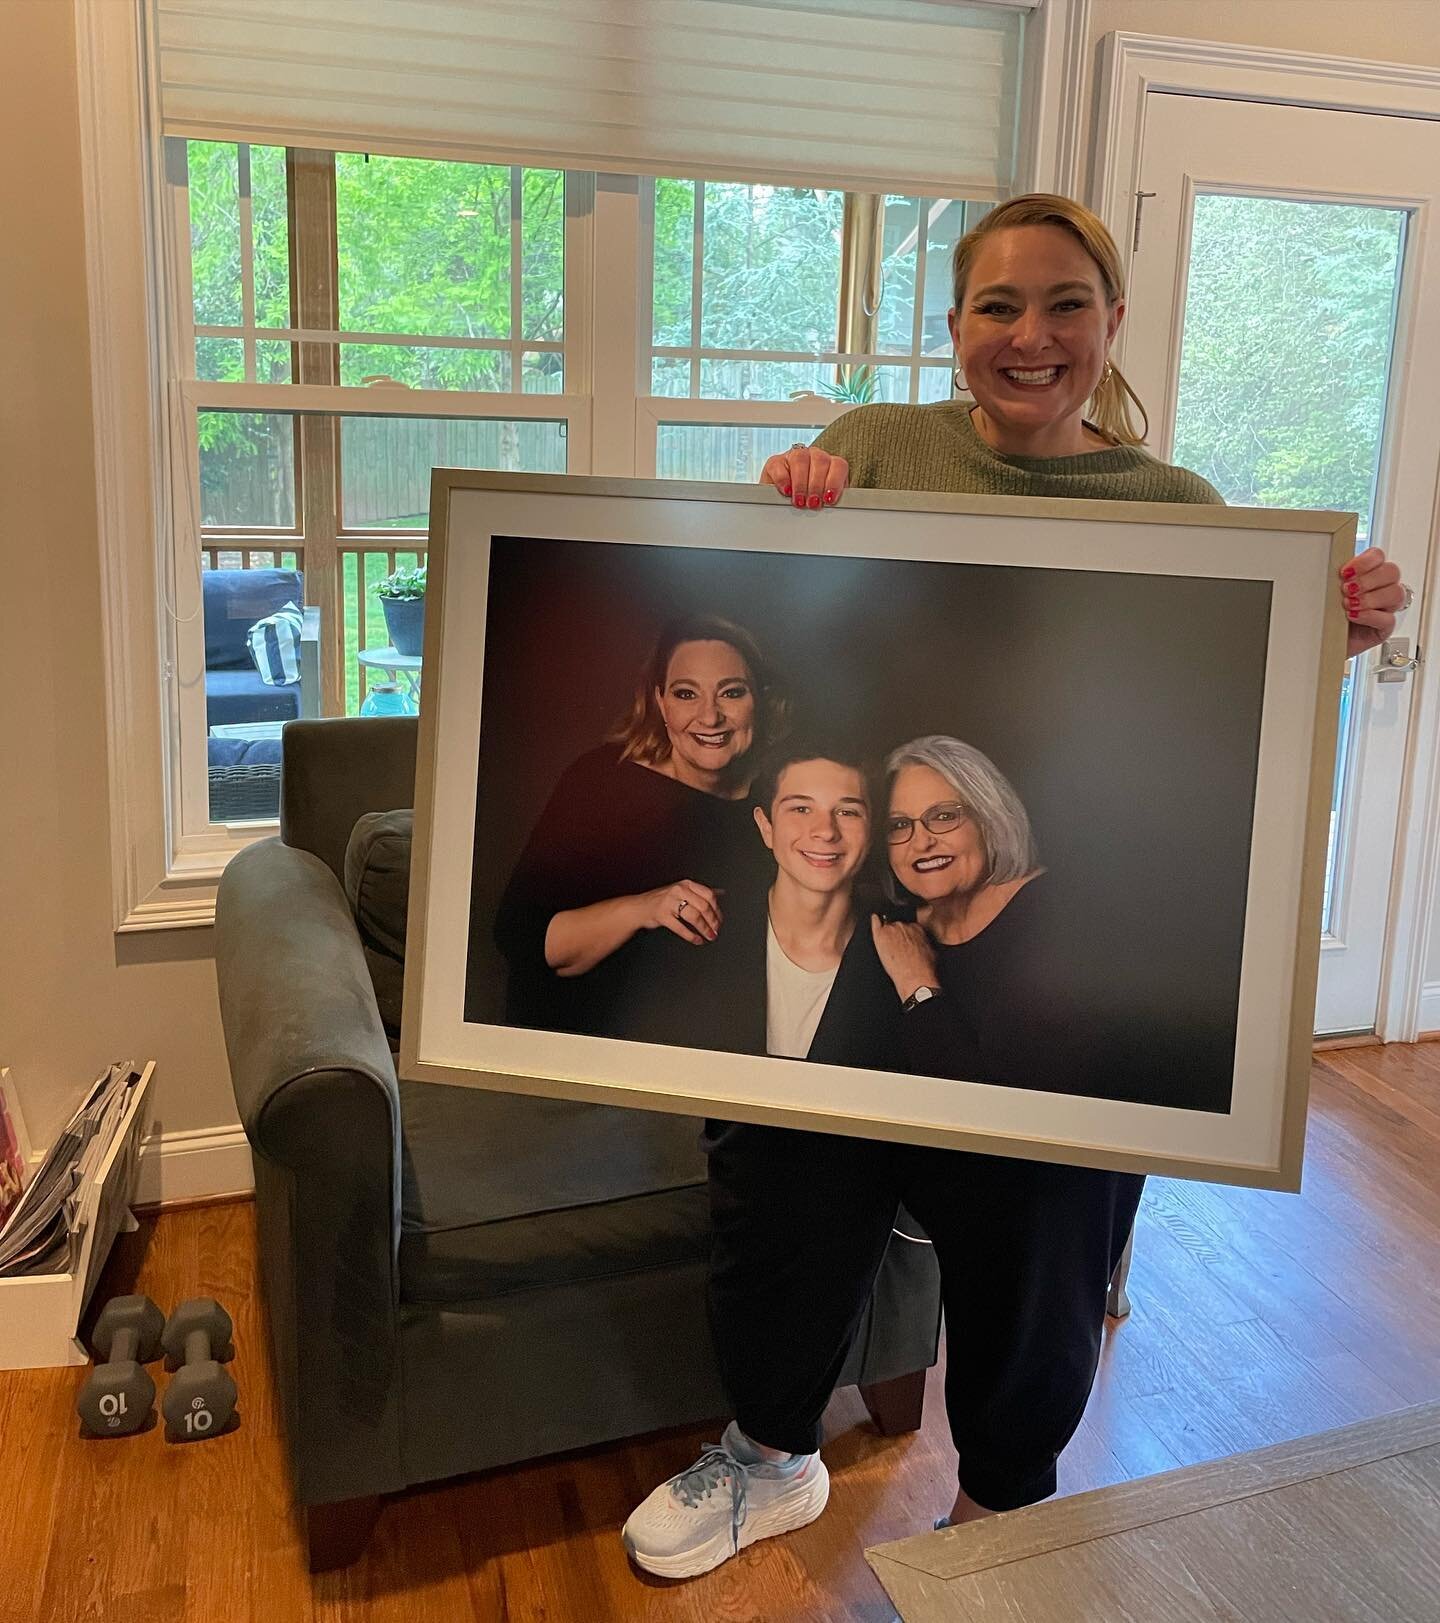 Happy day delivering this portrait to this gorgeous family. I loved every minute of working with this amazing client to create a three generation portrait to be displayed above her fireplace. ❤️ 

#raleighphotographer #ncphotographer #familyportraits